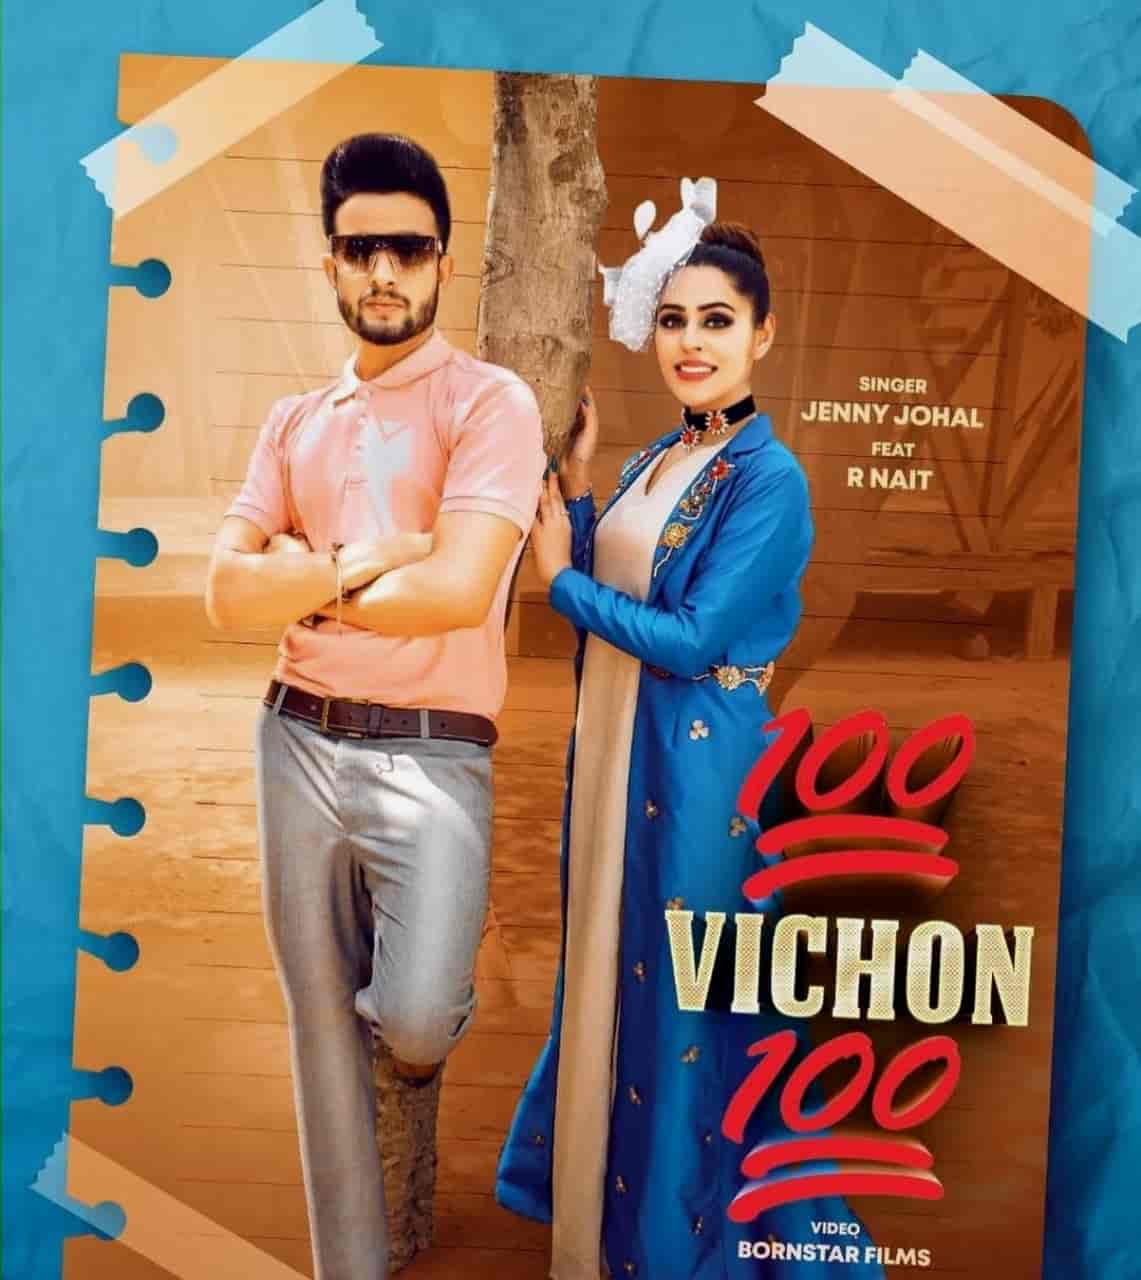 100 Vichon 100 Punjabi Song Image Features R Nait And Jenny Johal